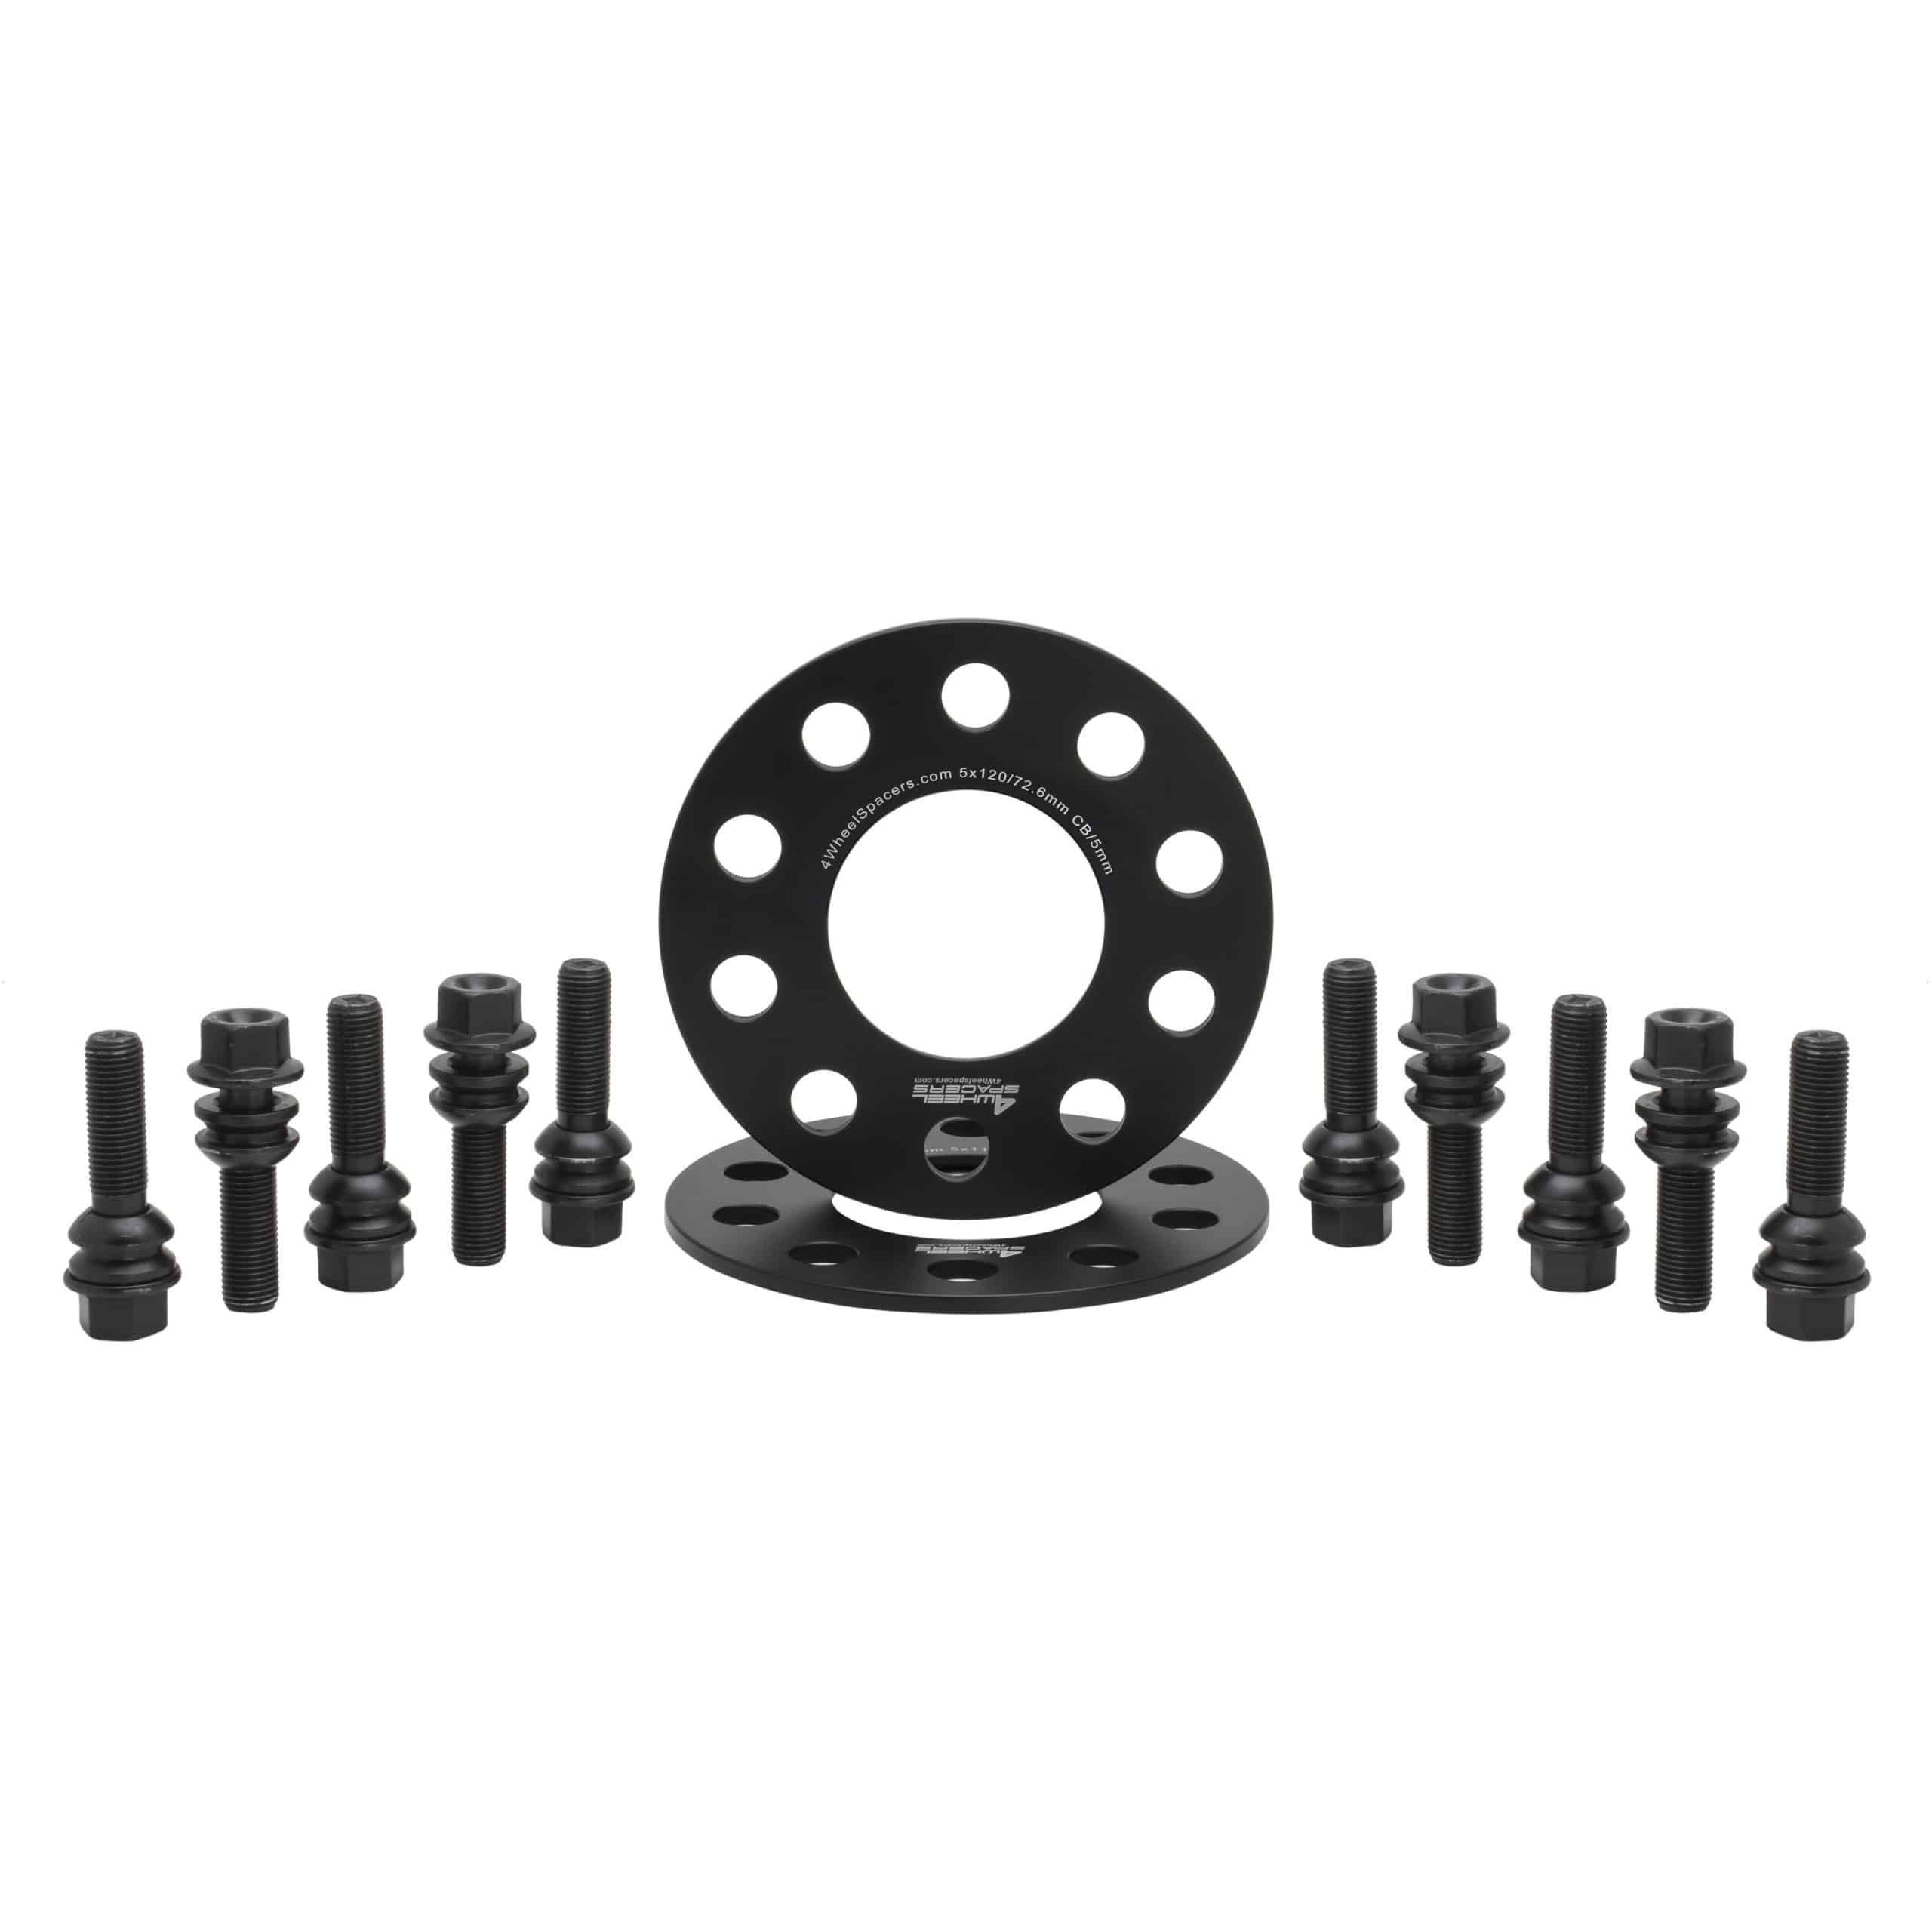 Porsche 8mm Wheel Spacers and Bolt Kit, 4WheelSpacers.com